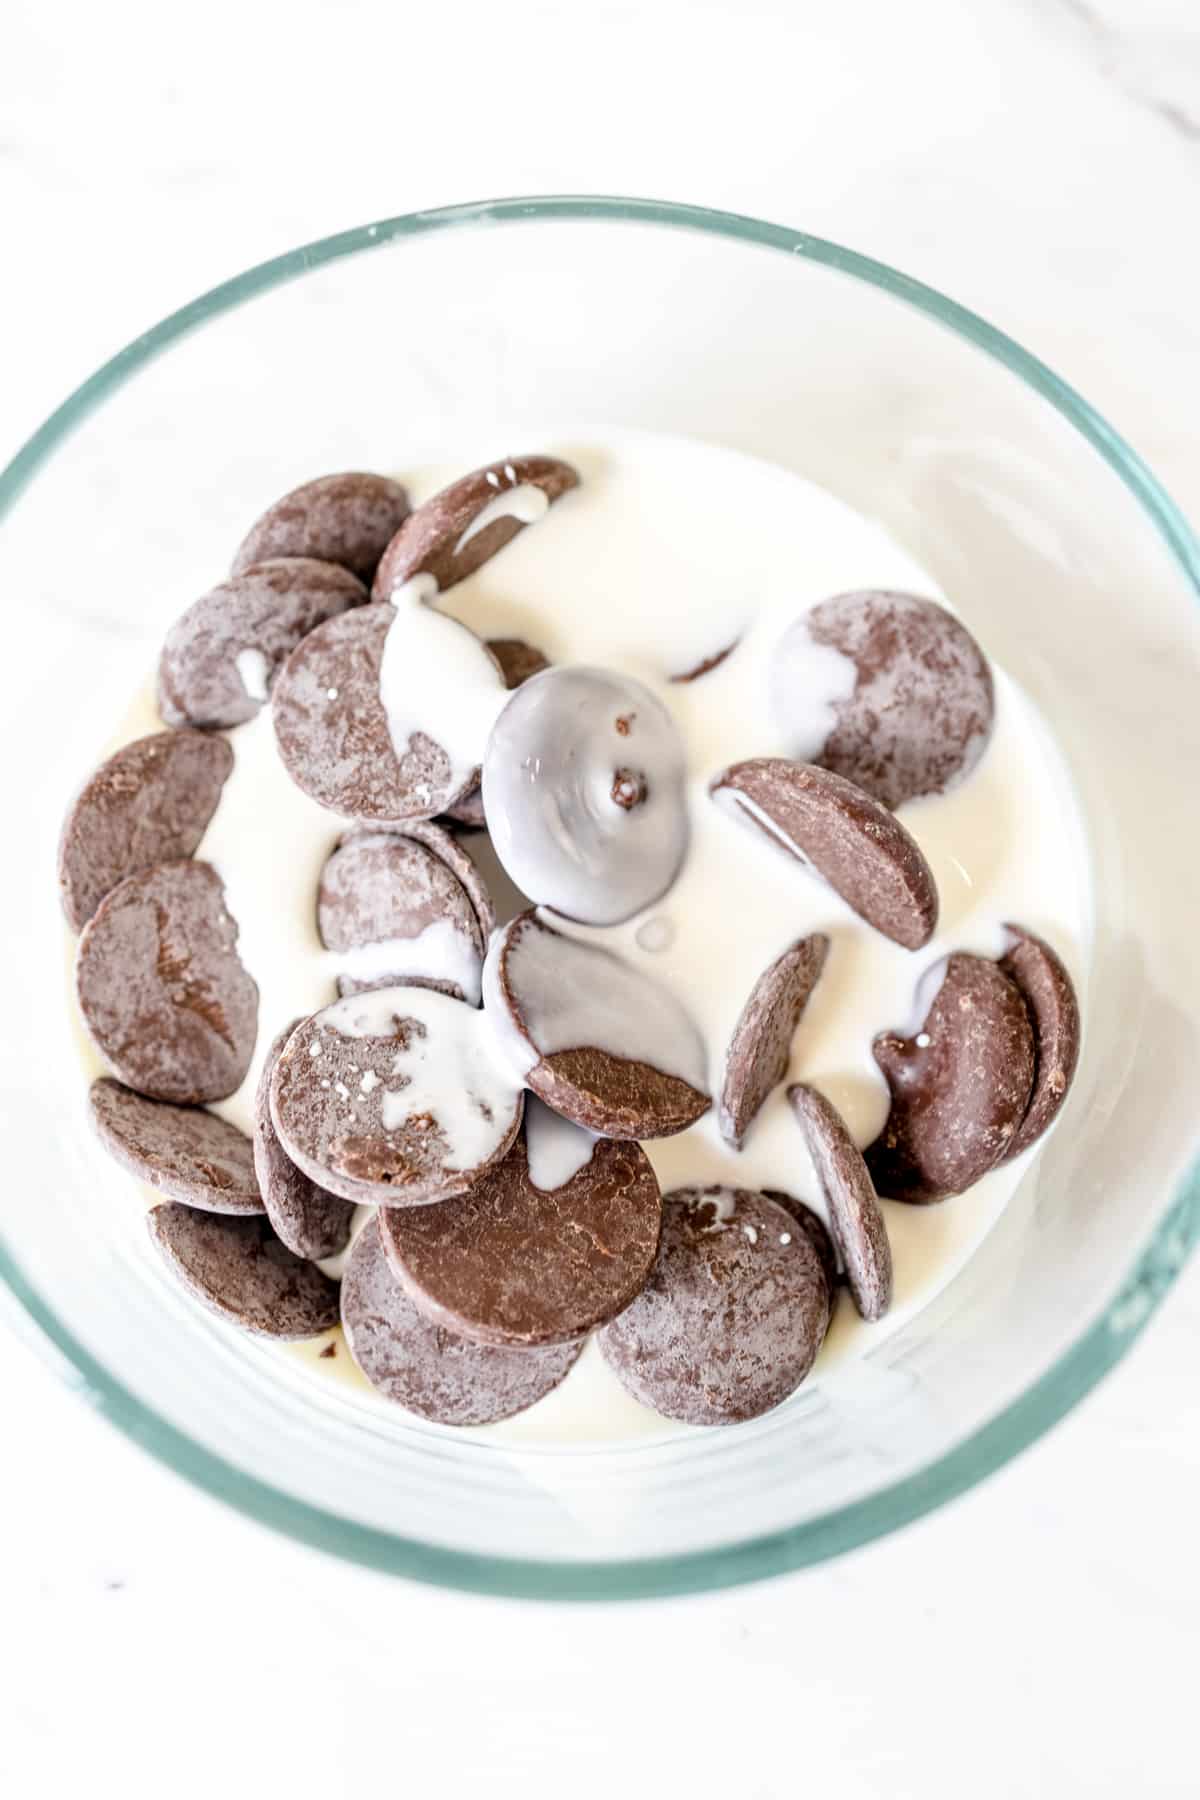 Top view of a glass mixing bowl with heavy cream and chocolate in it.